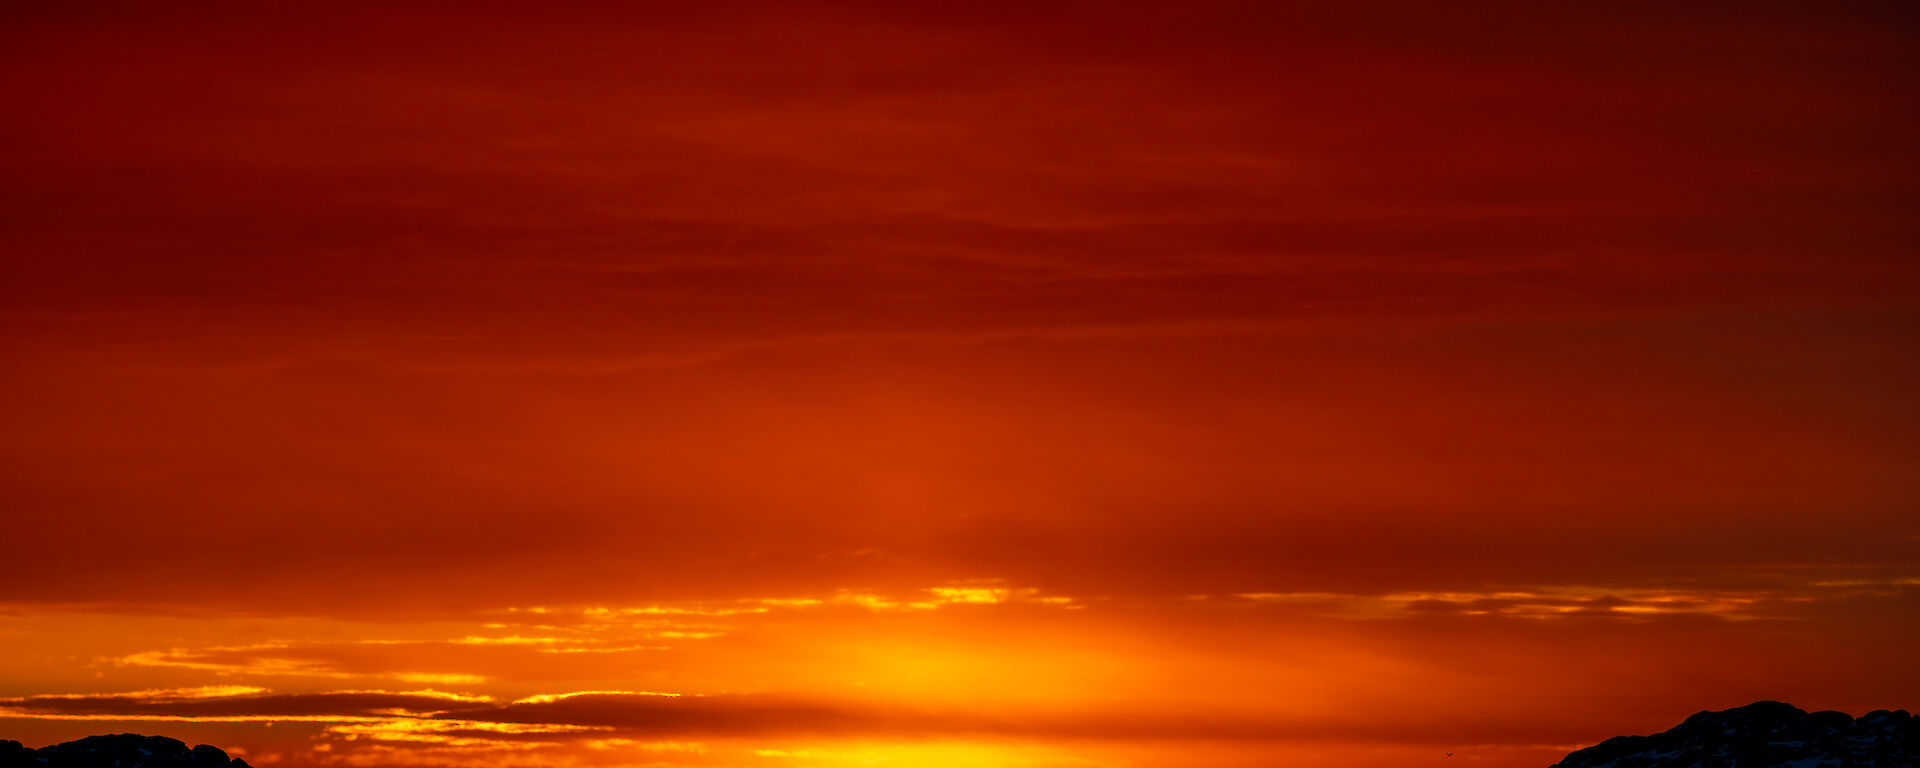 A richly-coloured sunset scene, showing an ocean and distant icebergs in silhouette beneath a darkening vermilion sky. Low clouds above the sunset are outlined in bright gold